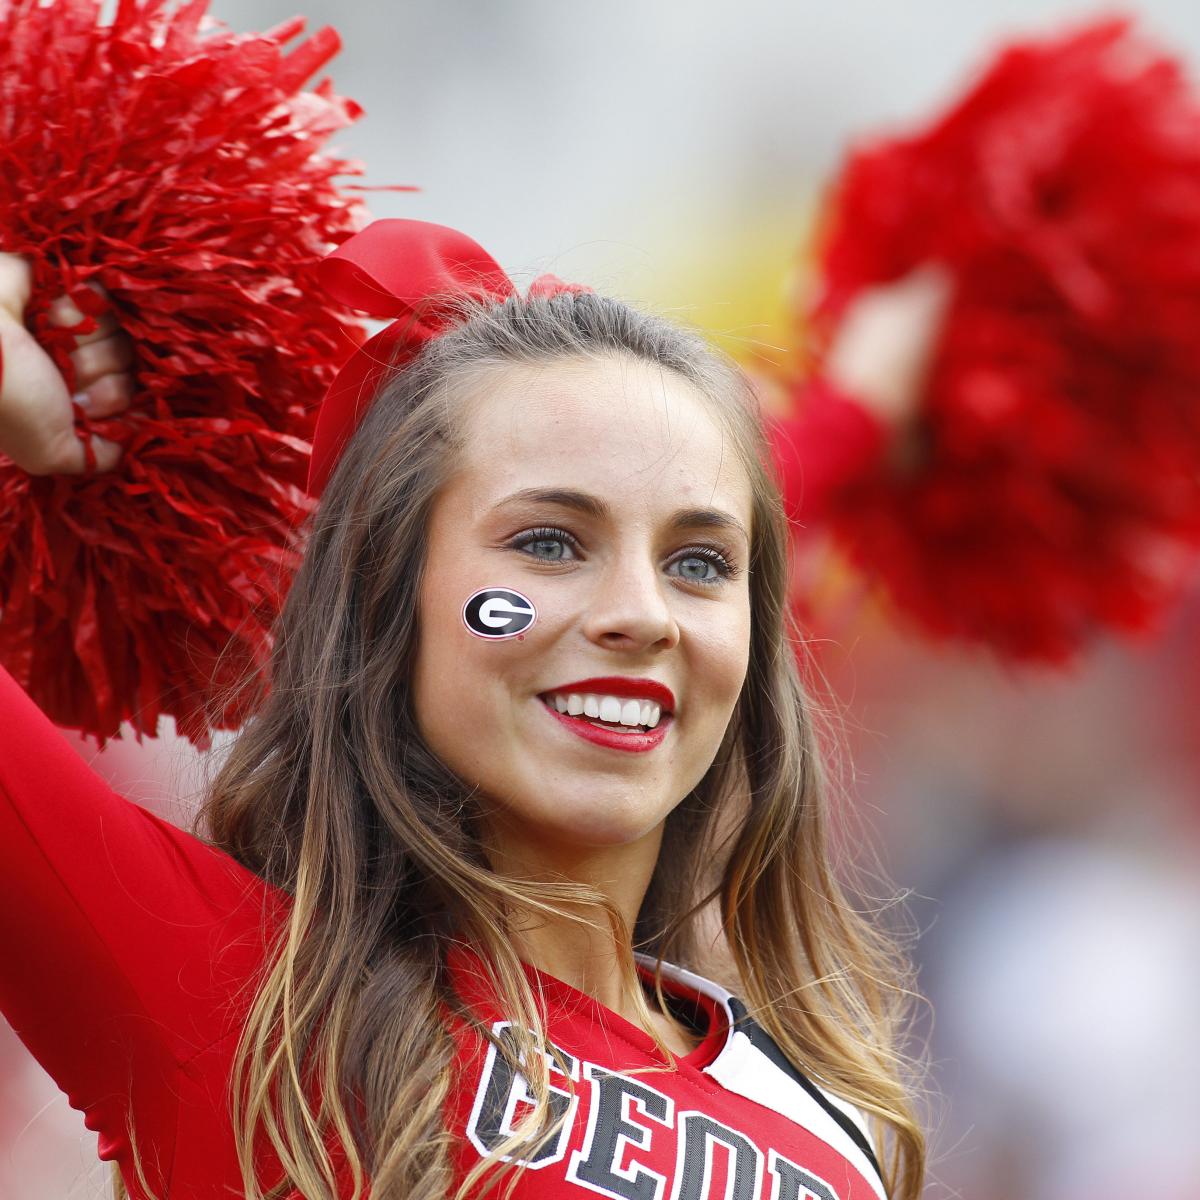 Georgia Cheerleaders Suffered More Concussions Than